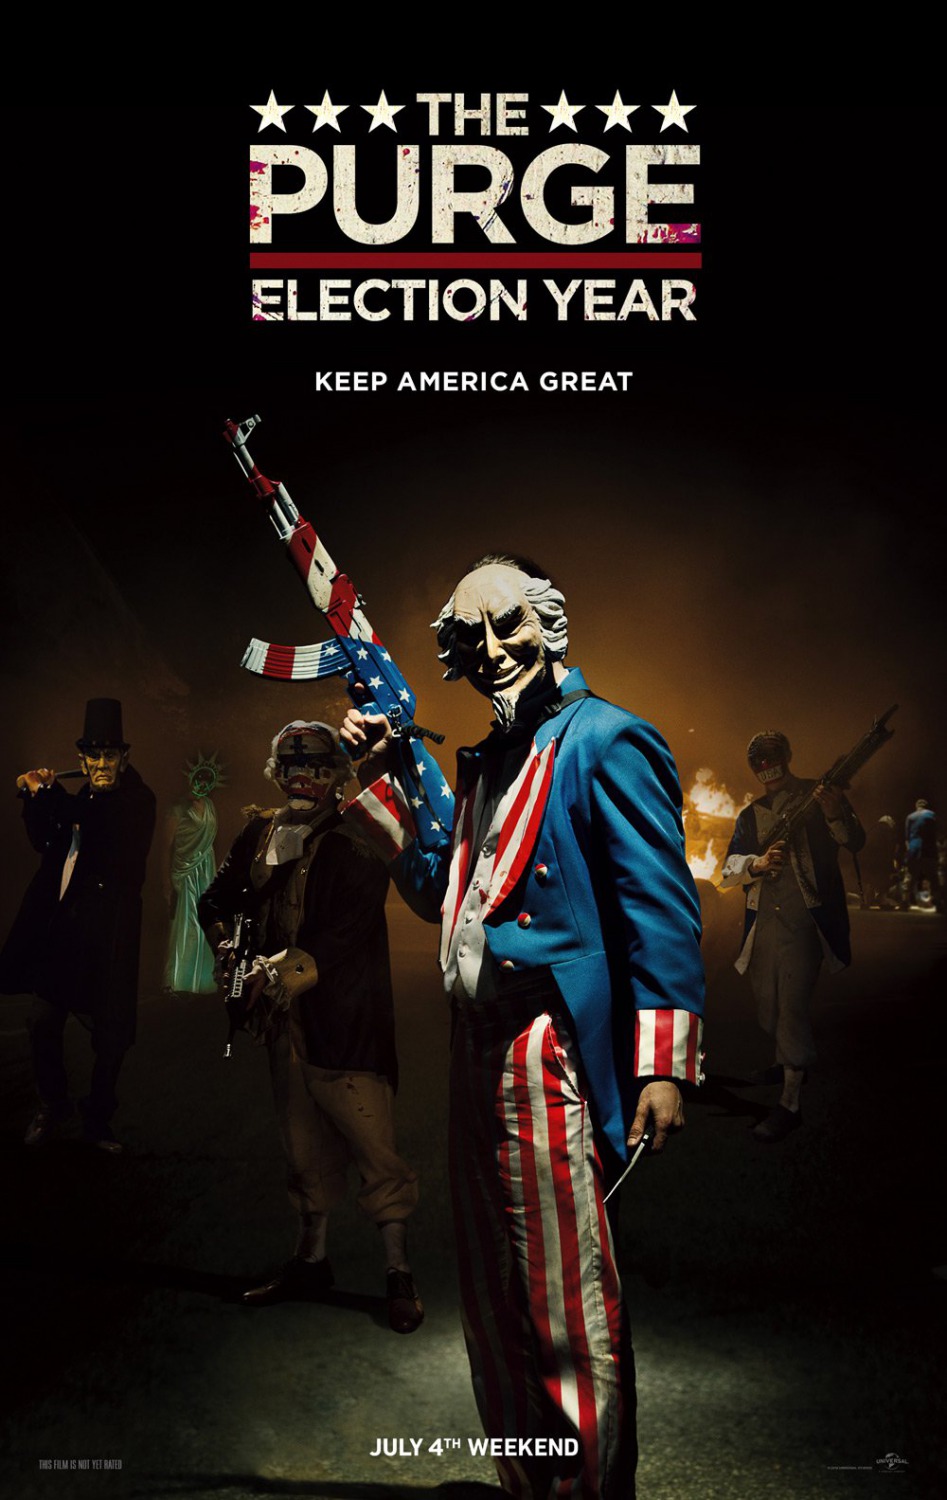 purge_election_year_poster_2